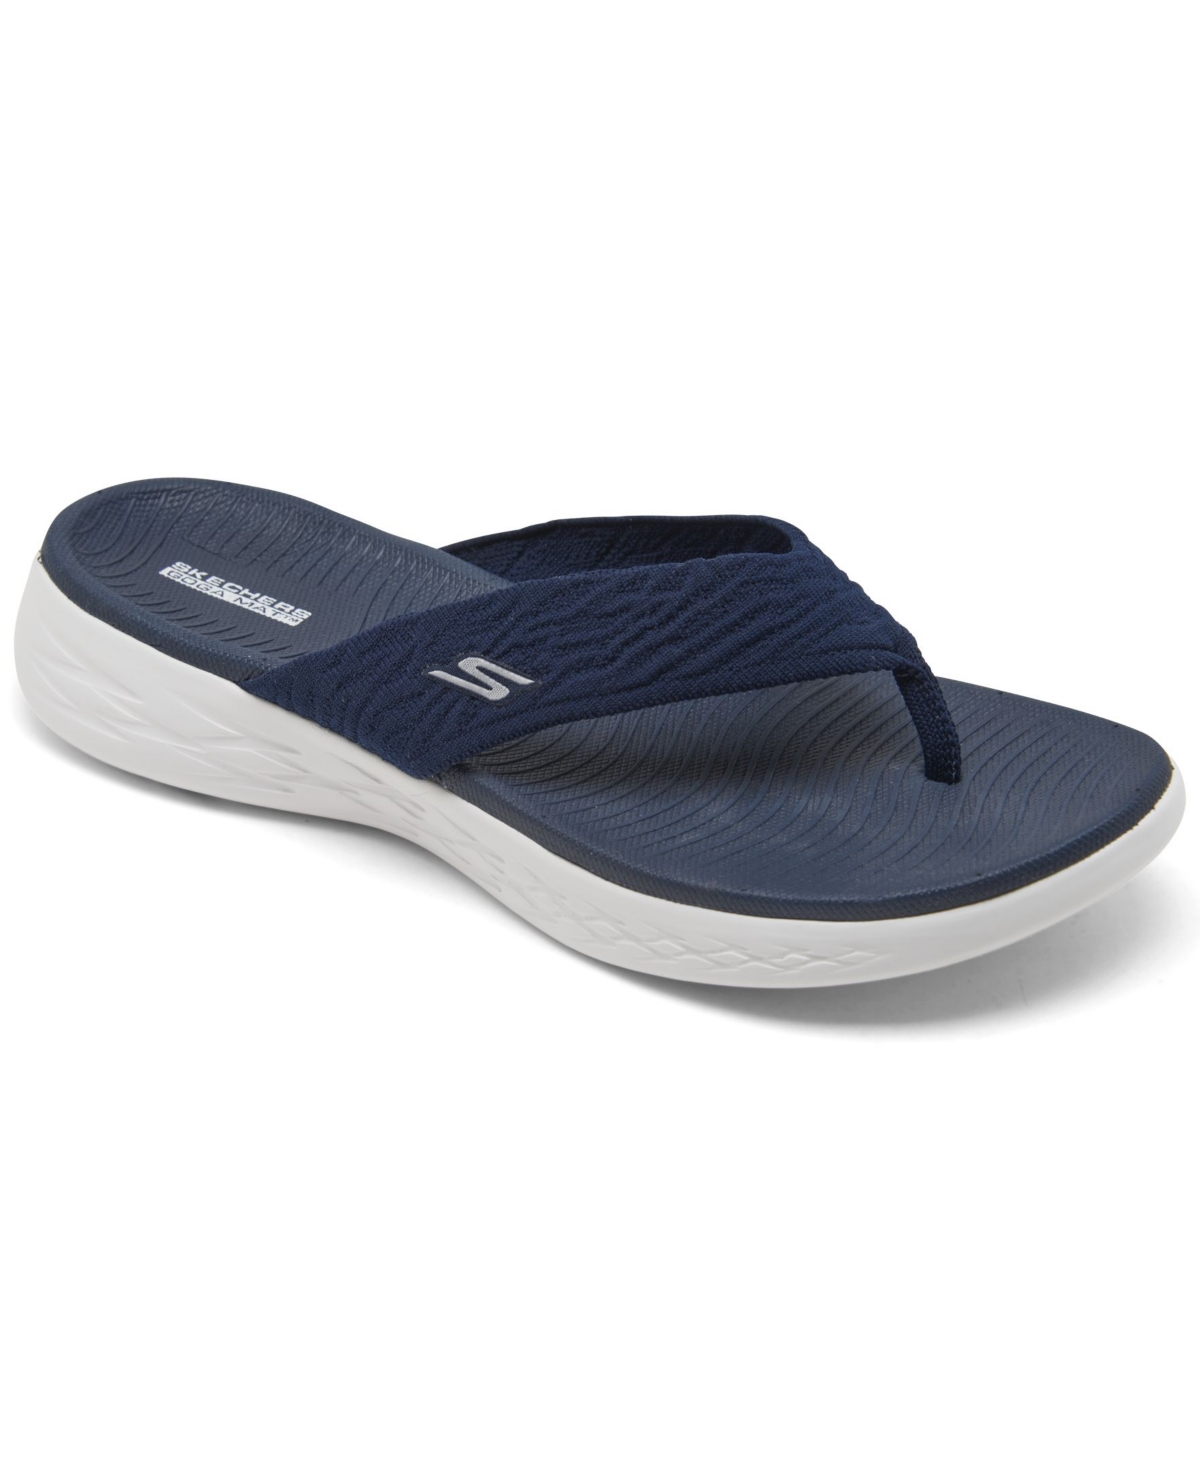 Women's On The Go 600 Sunny Athletic Flip Flop Thong Sandals from Finish Line - Navy